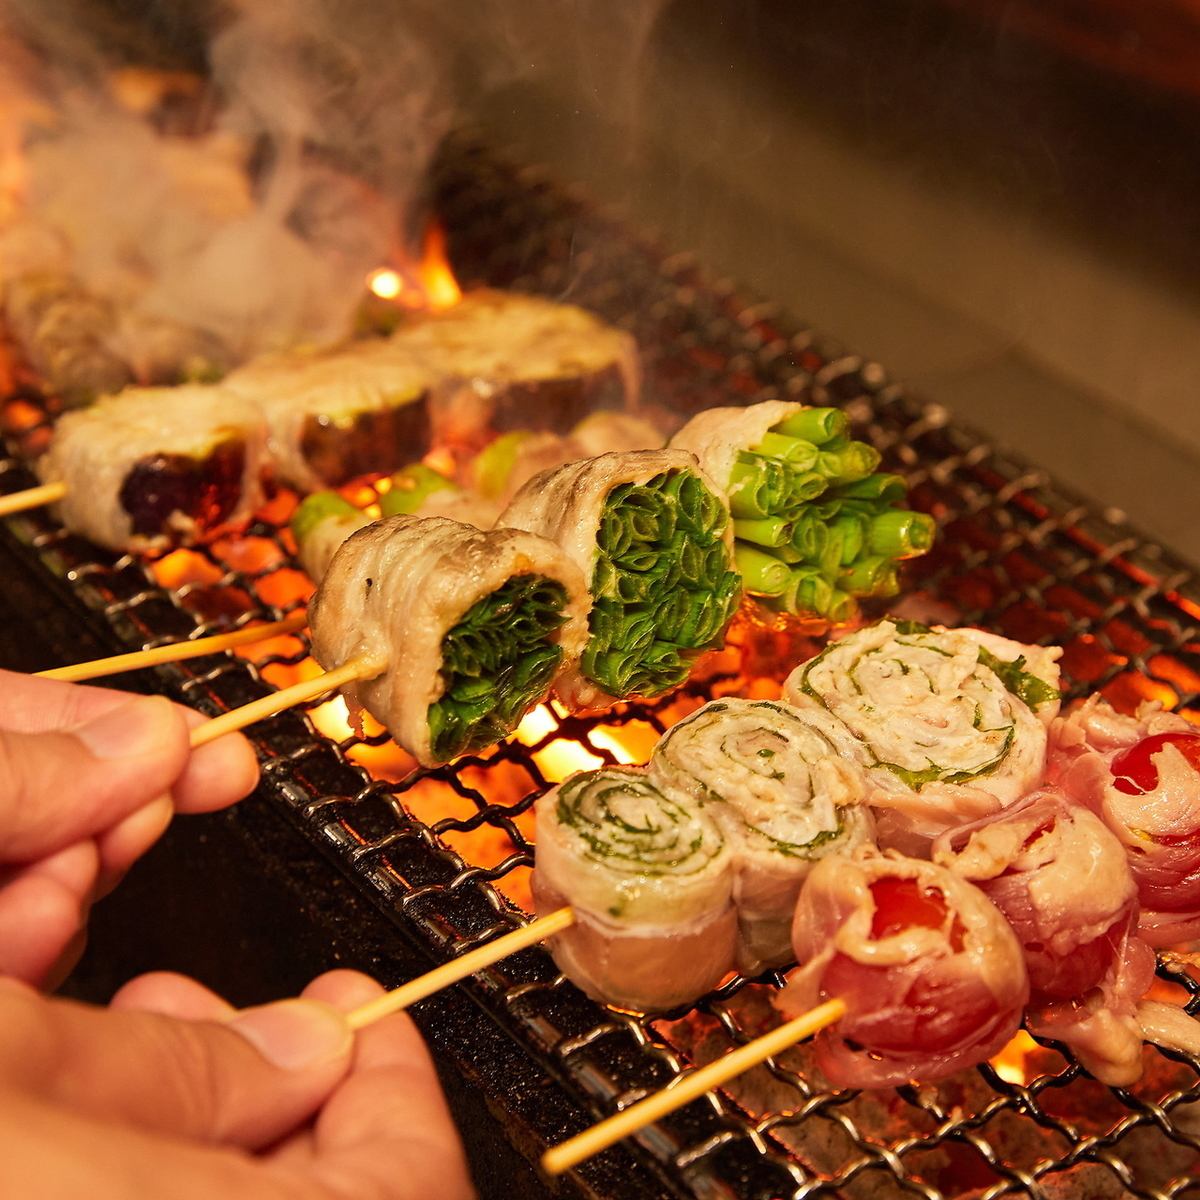 Yakitori grilled over binchotan charcoal, Hakata vegetable rolls, and other delicacies where you can enjoy the aroma of charcoal♪